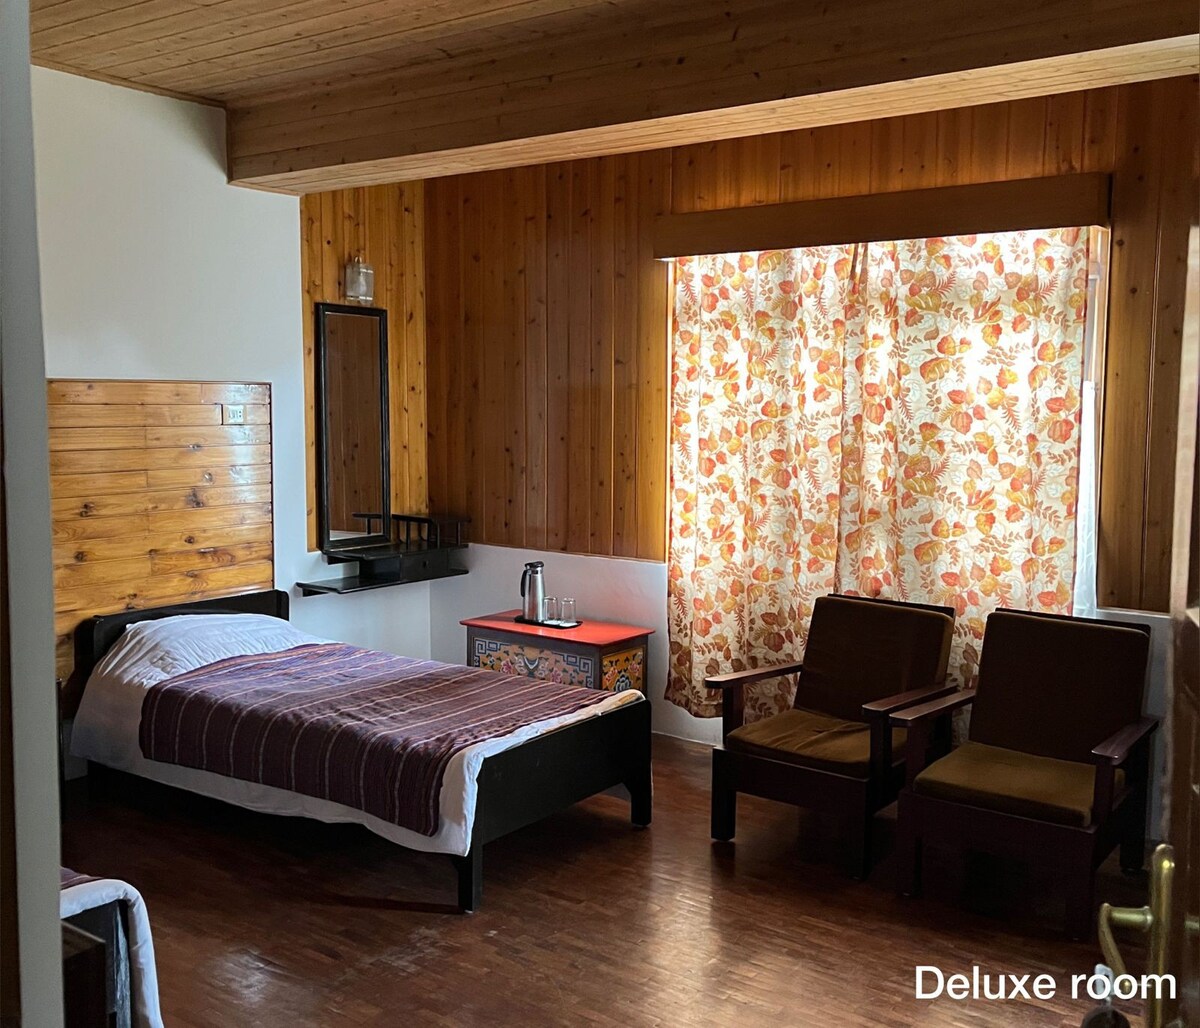 Mintokling Guest House (Deluxe Room)